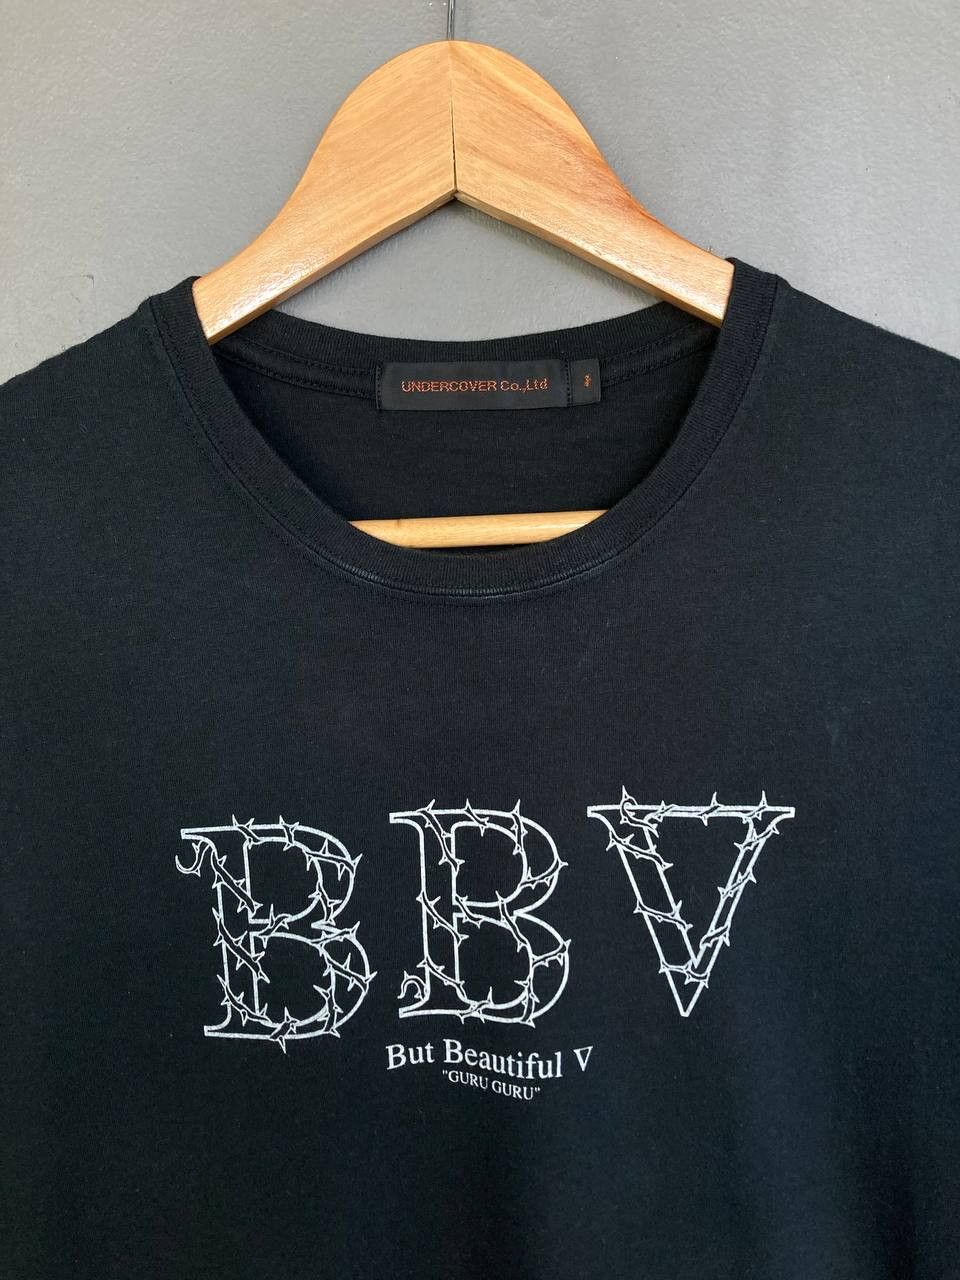 AW06 Undercover “But Beautiful V” Tee - 5